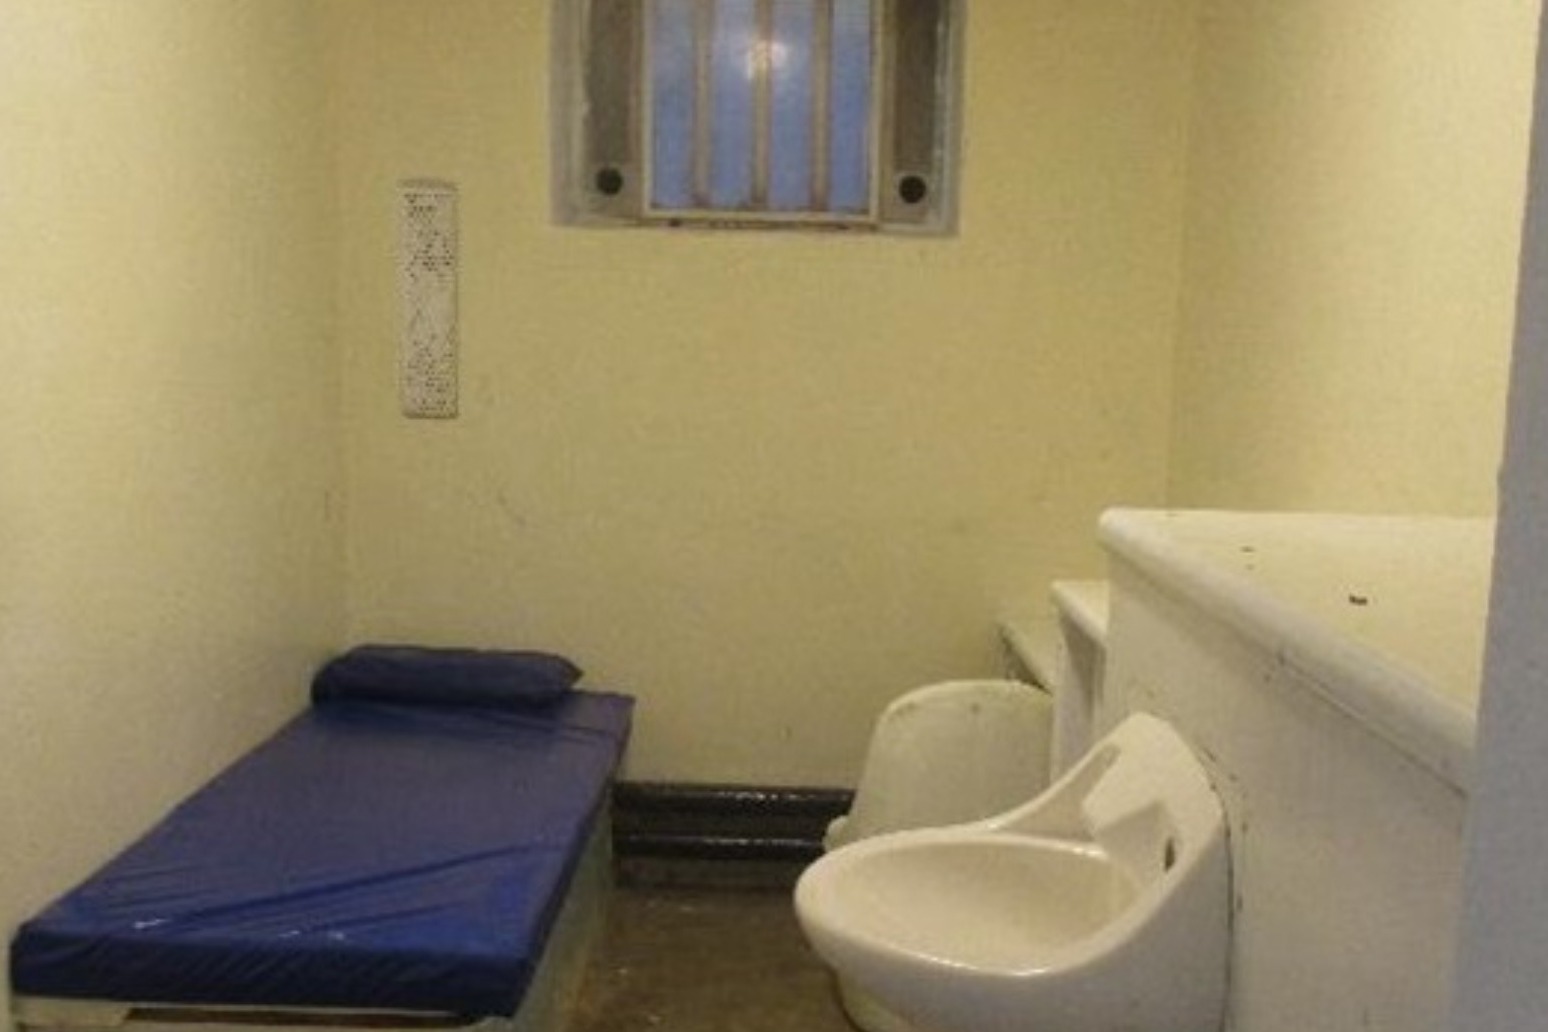 Watchdog condemns conditions at Bedford prison 